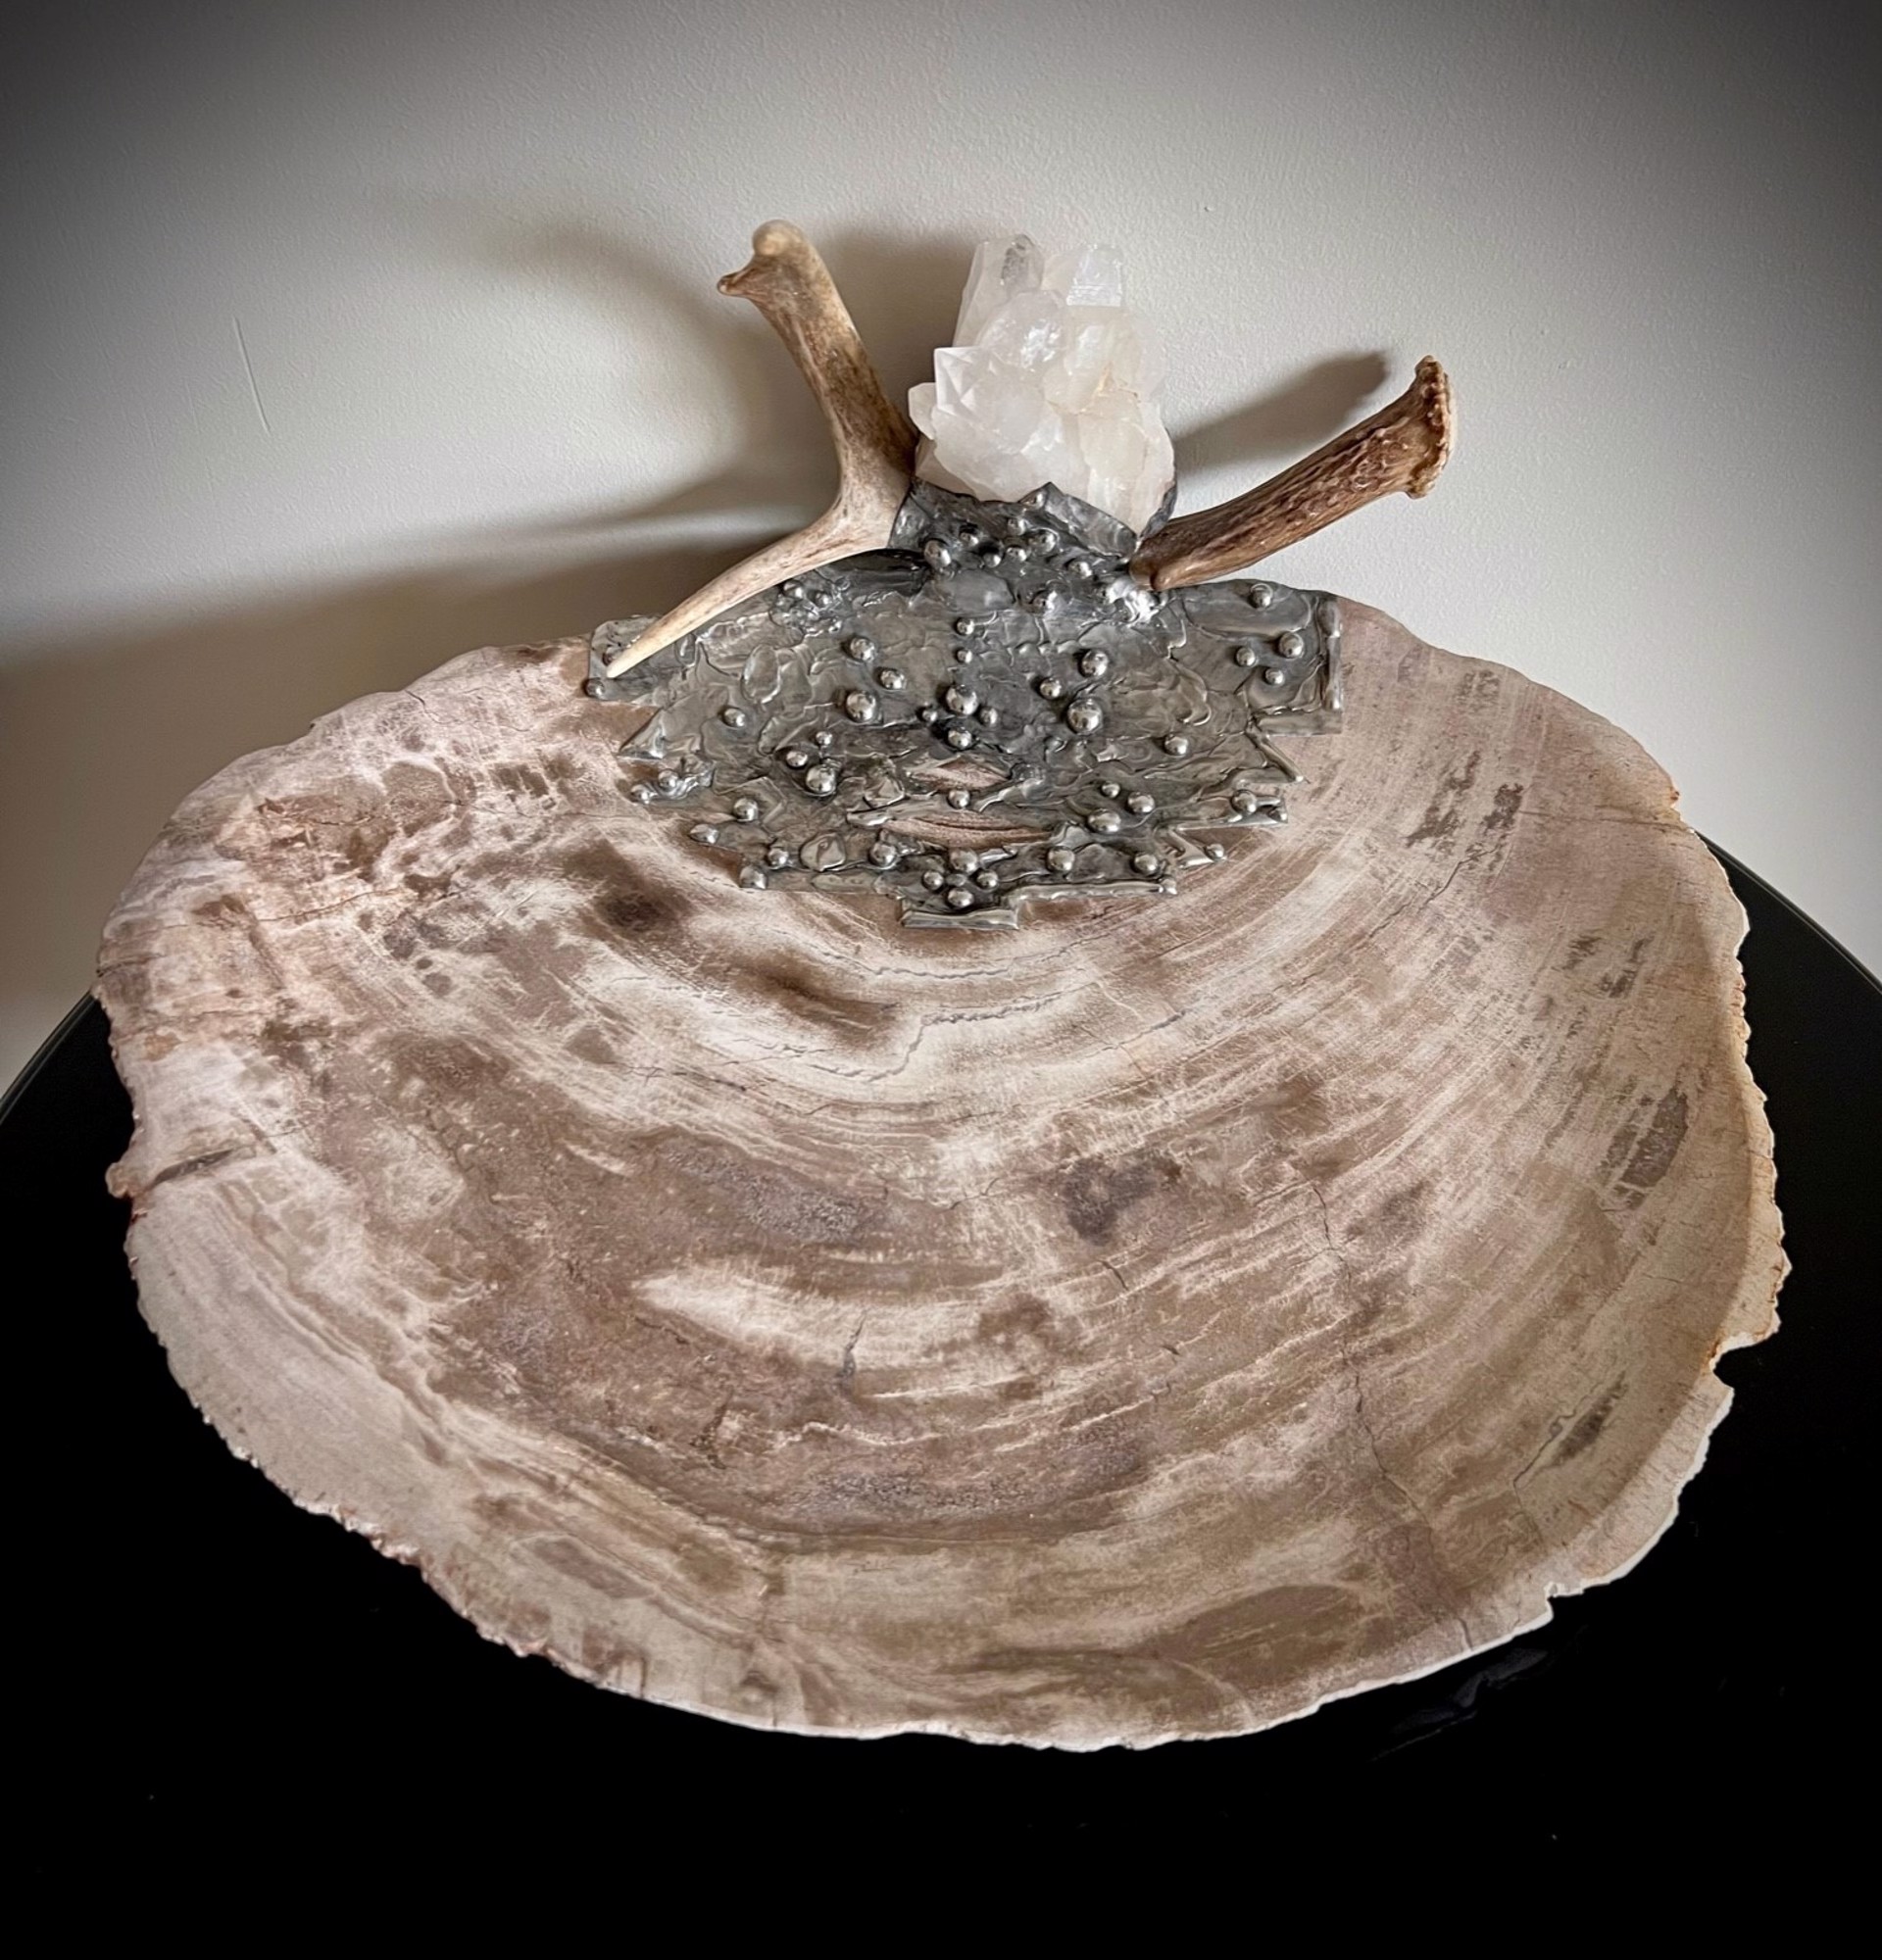 Neutral Petrified Wood Platter with Antler and Quartz by Trinka 5 Designs